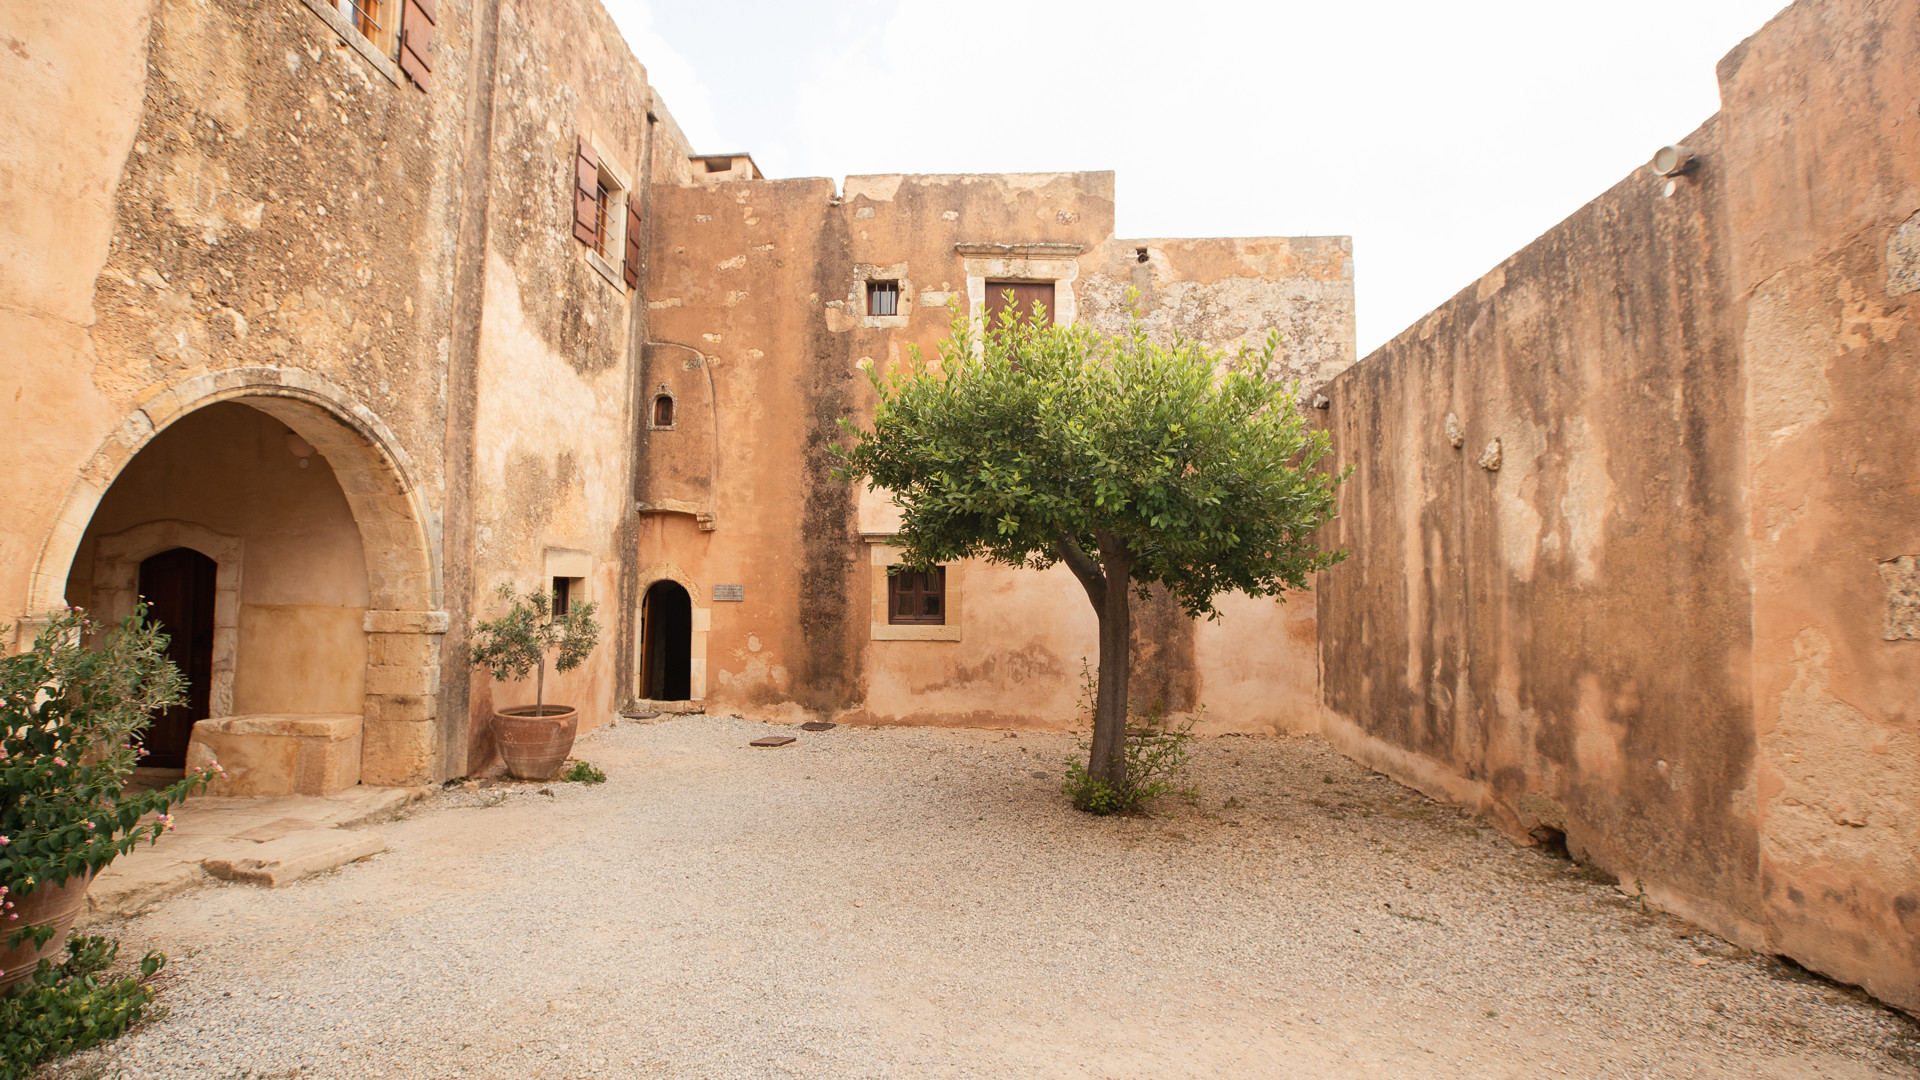 Every corner of the Arkadi Monastery has a different feel